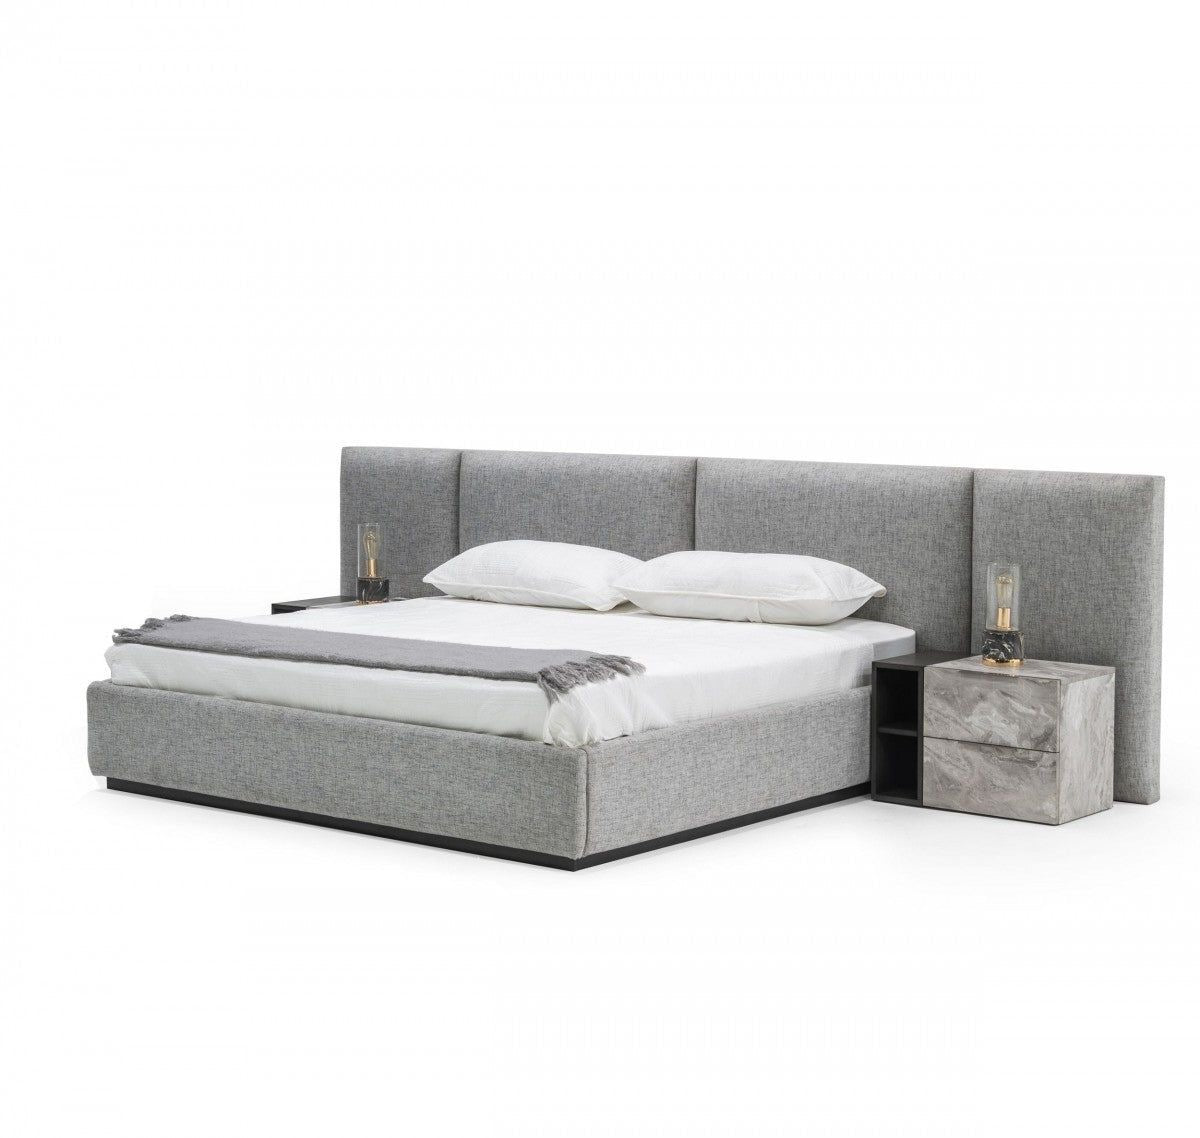 headboard and base set in upholstered light grey fabric with 4 squares on the headboard.